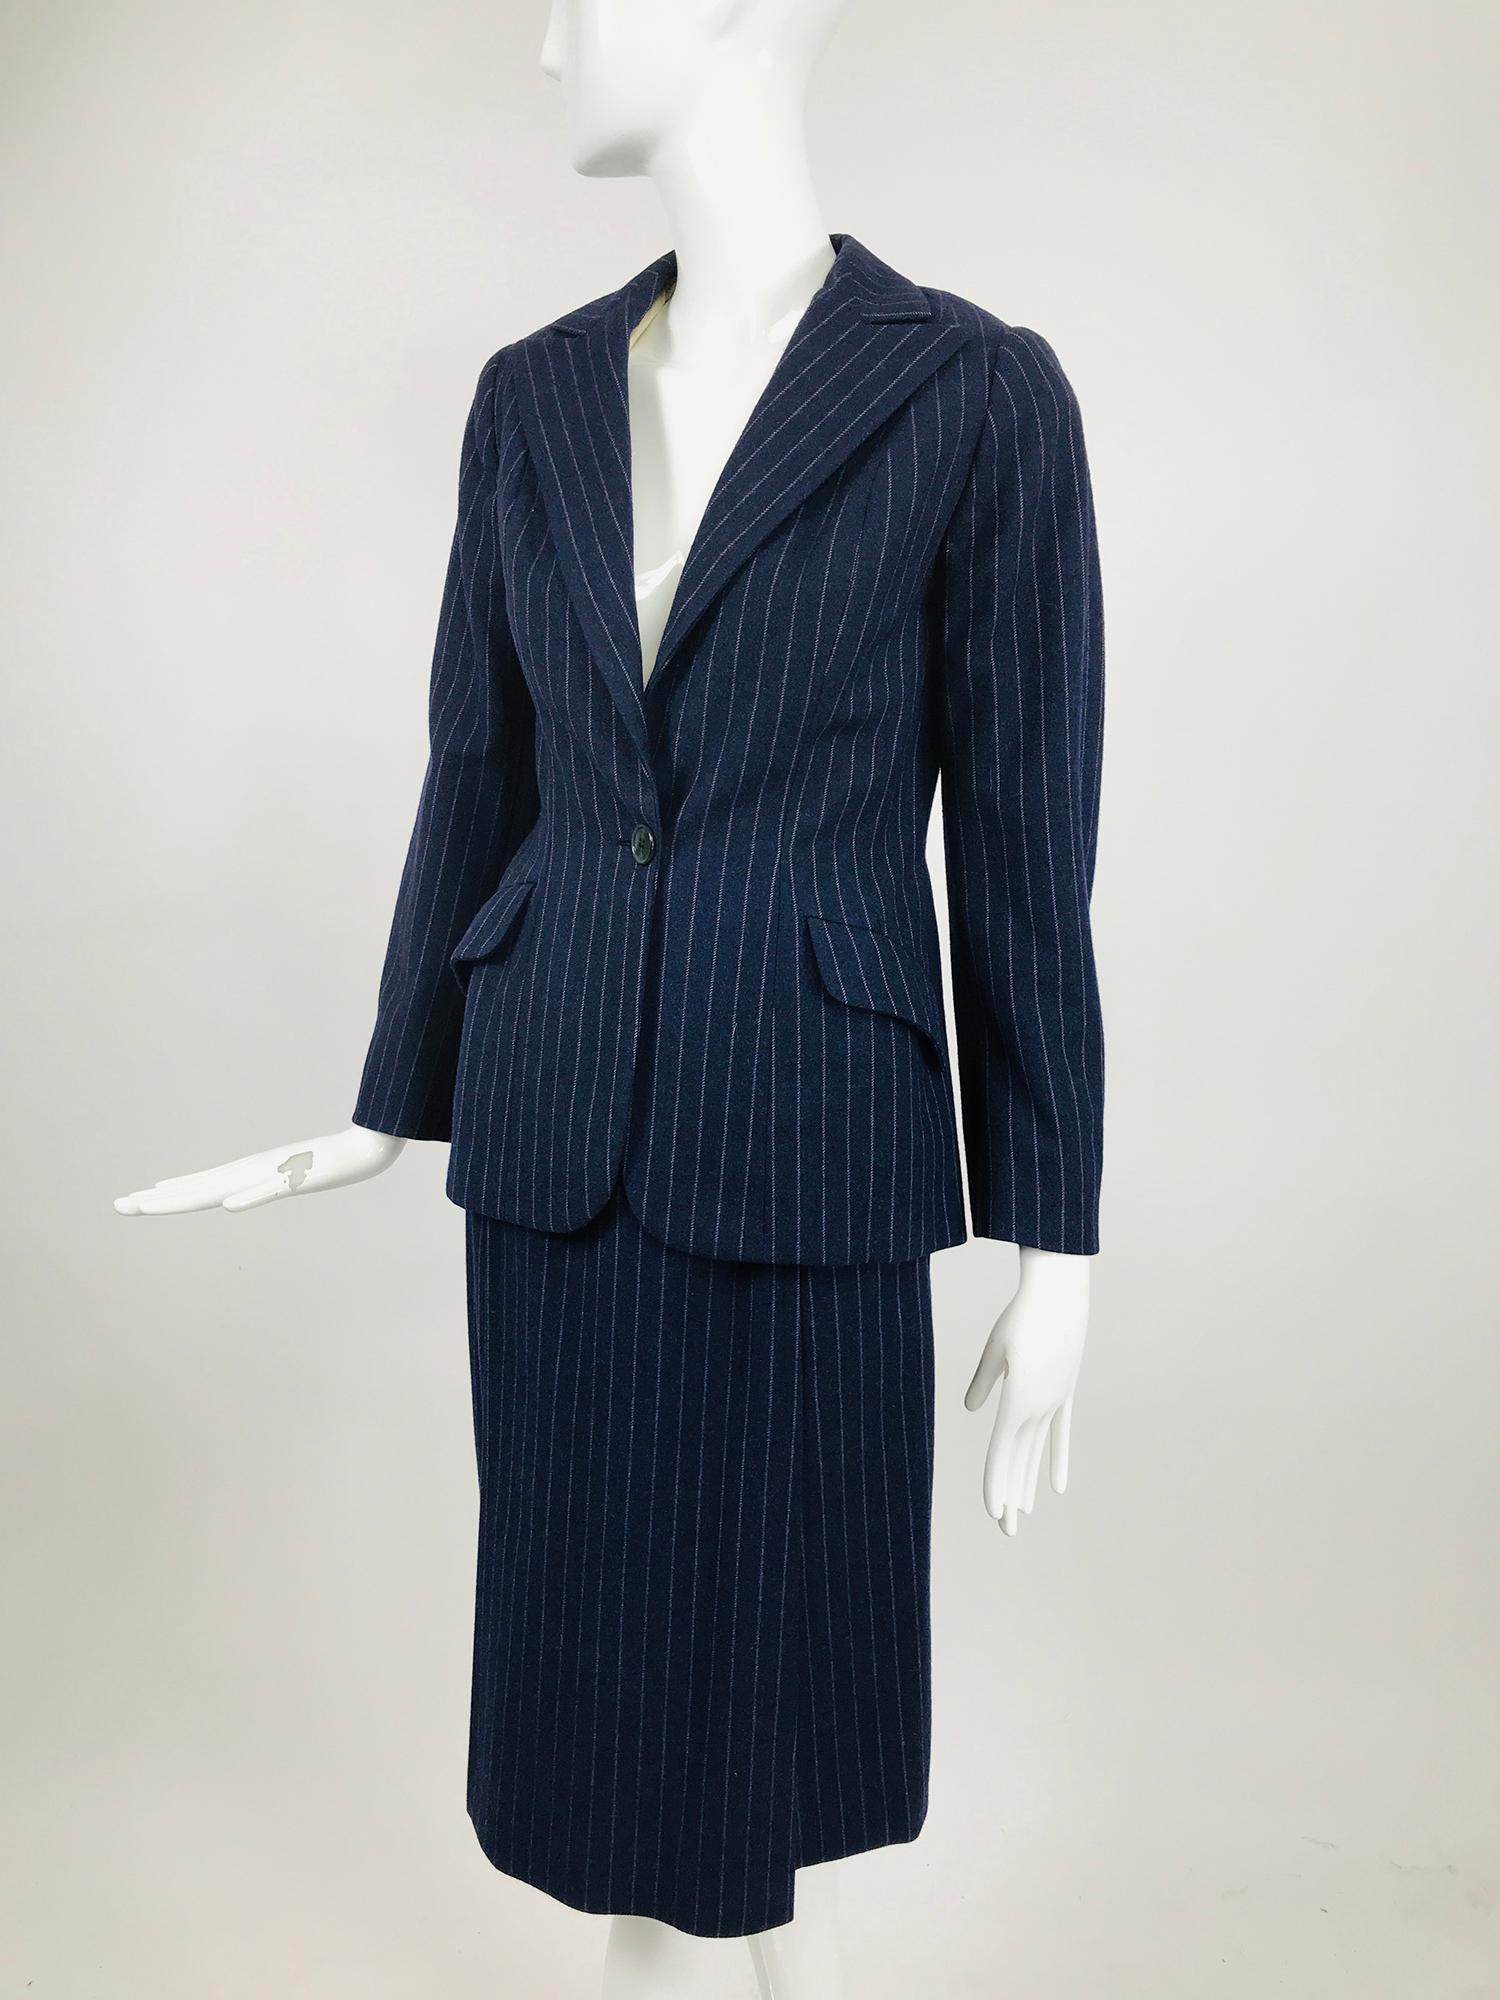 1950s Striped Worsted Wool Jacket